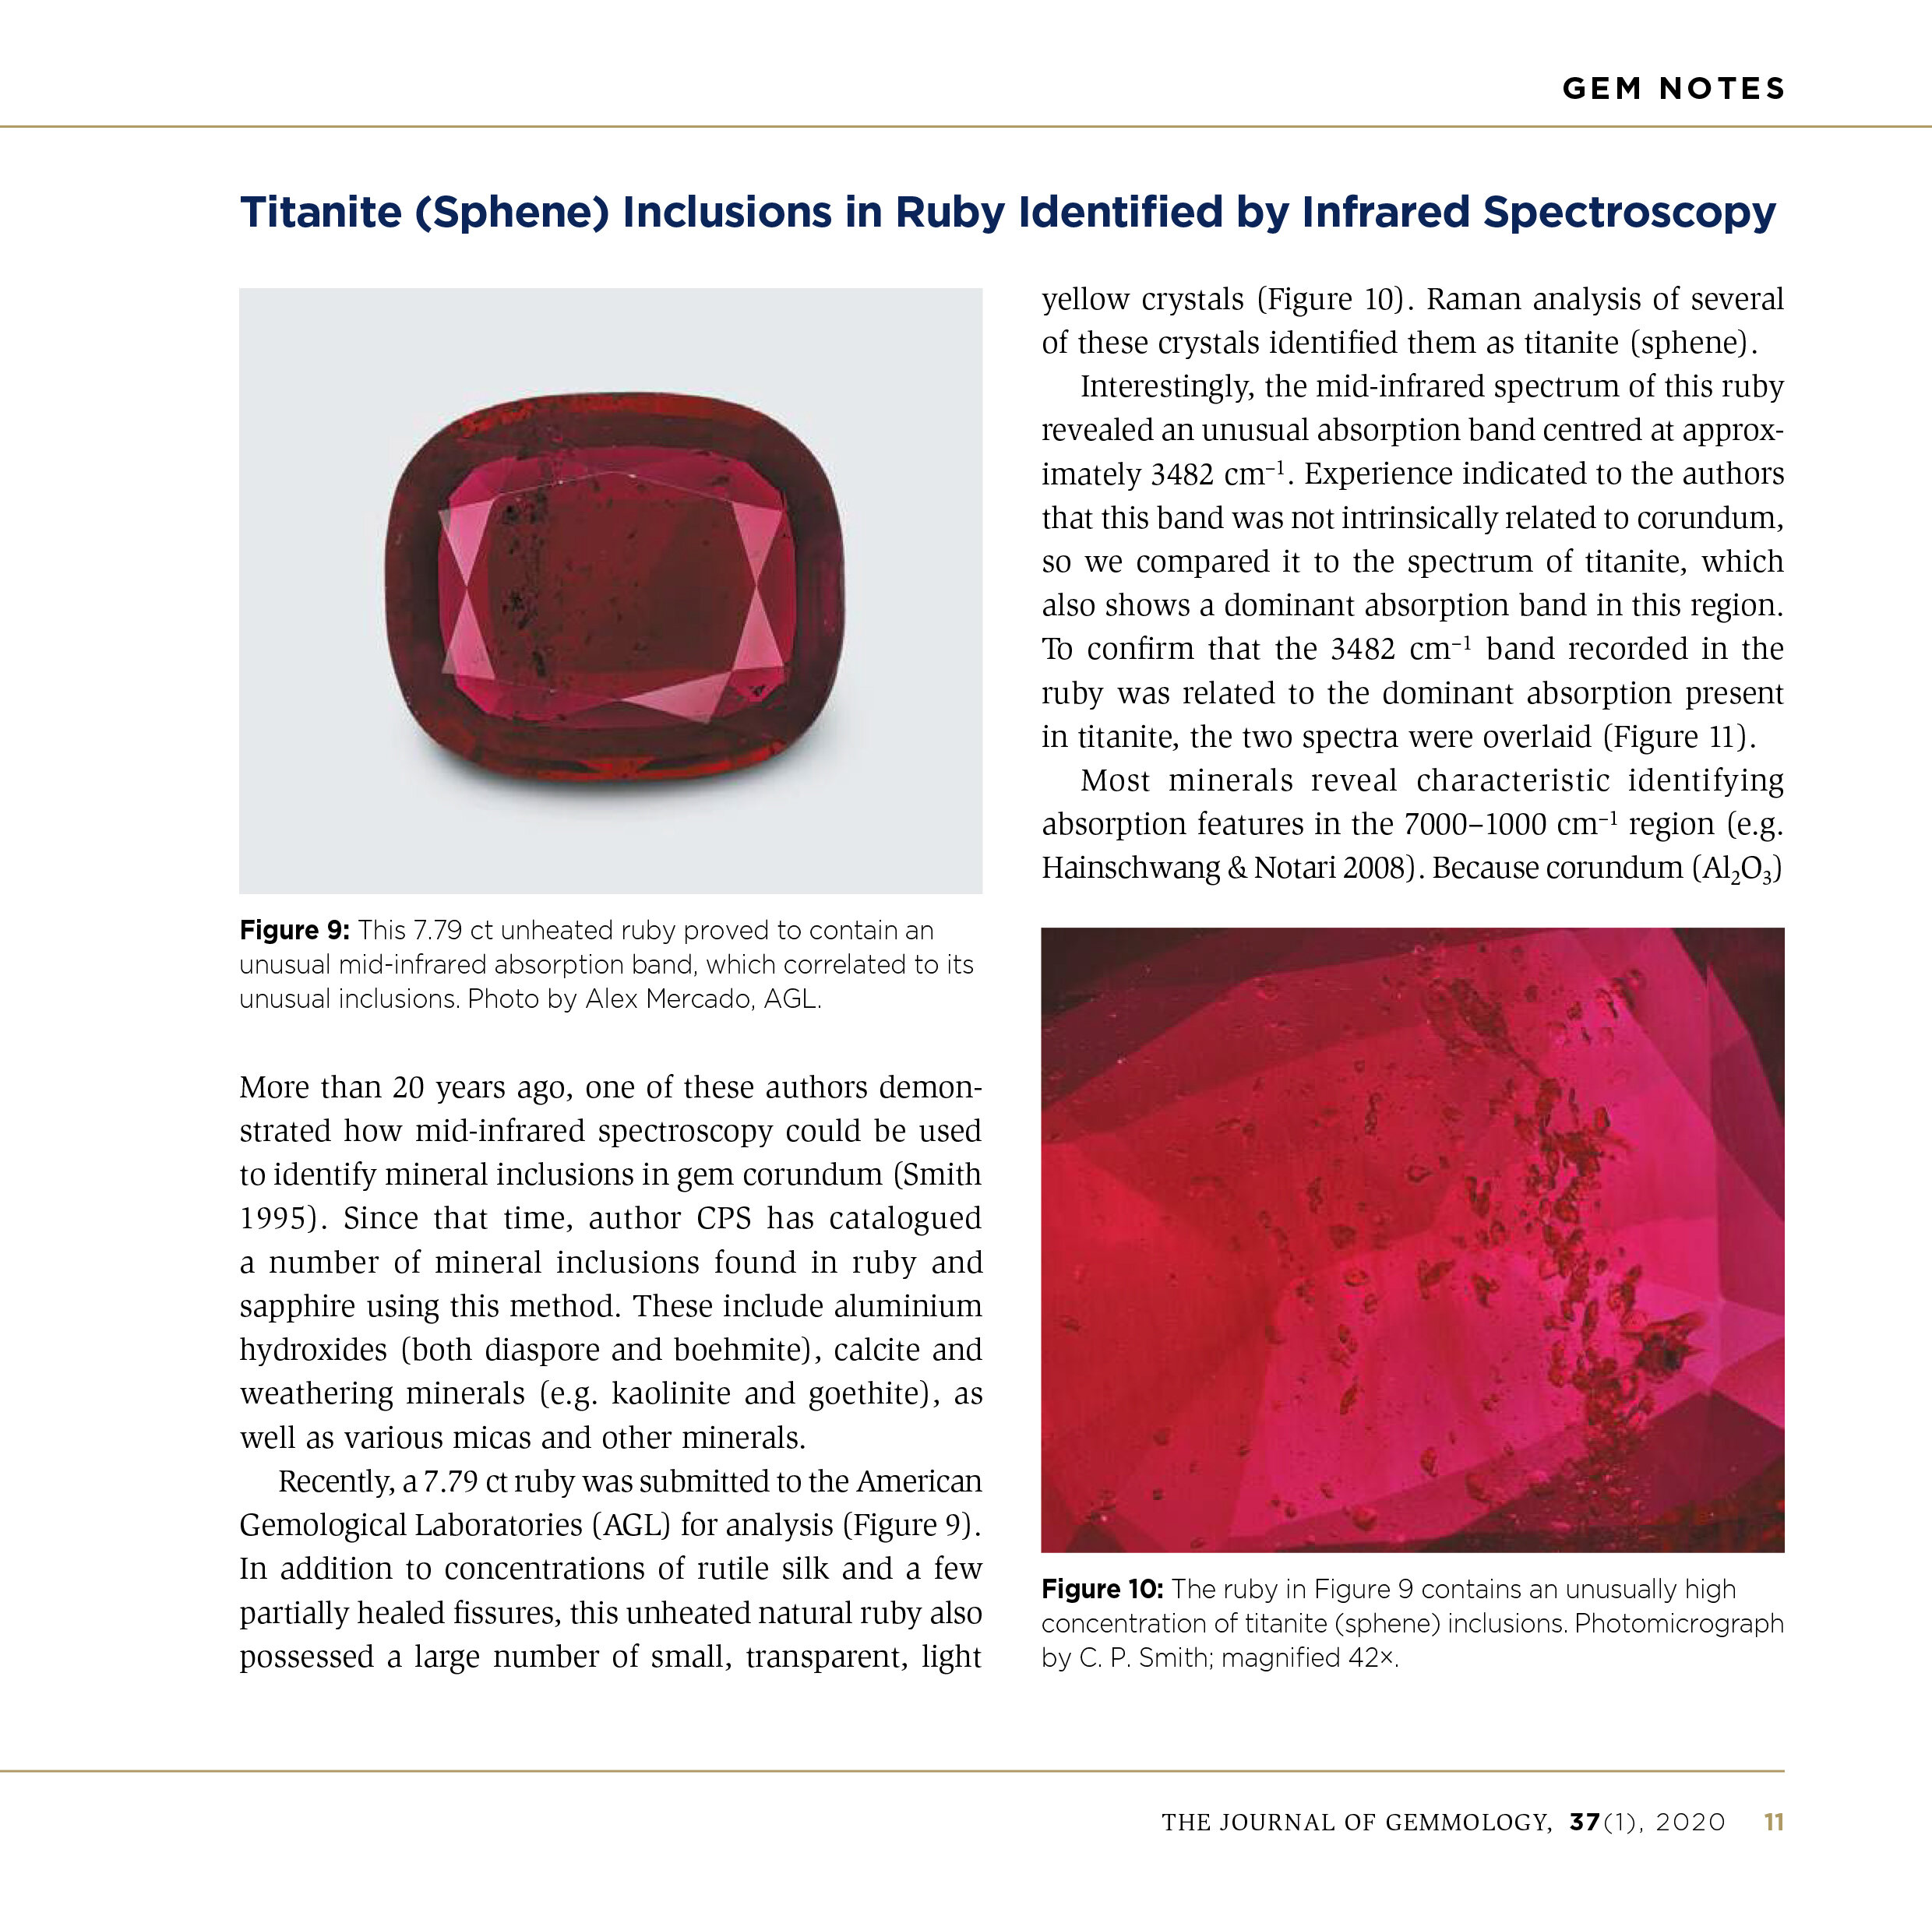 Titanite (Sphene) Inclusions in Ruby Identified by Infrared ...